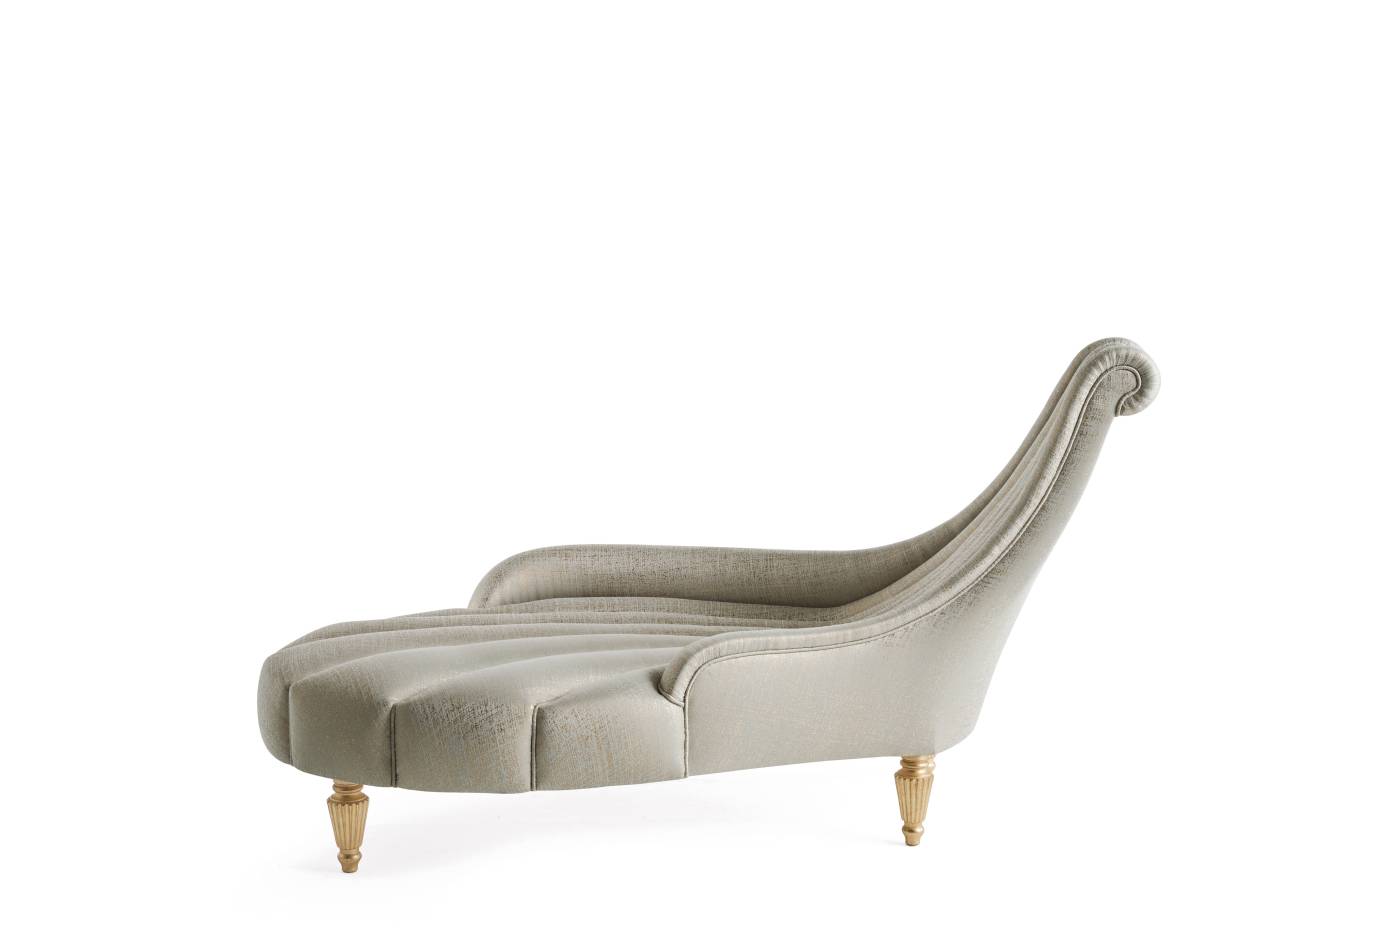 JUPITER dormeuse - Discover timeless elegance with Jumbo Collection's Italian luxury chaise longues and dormeuses. 